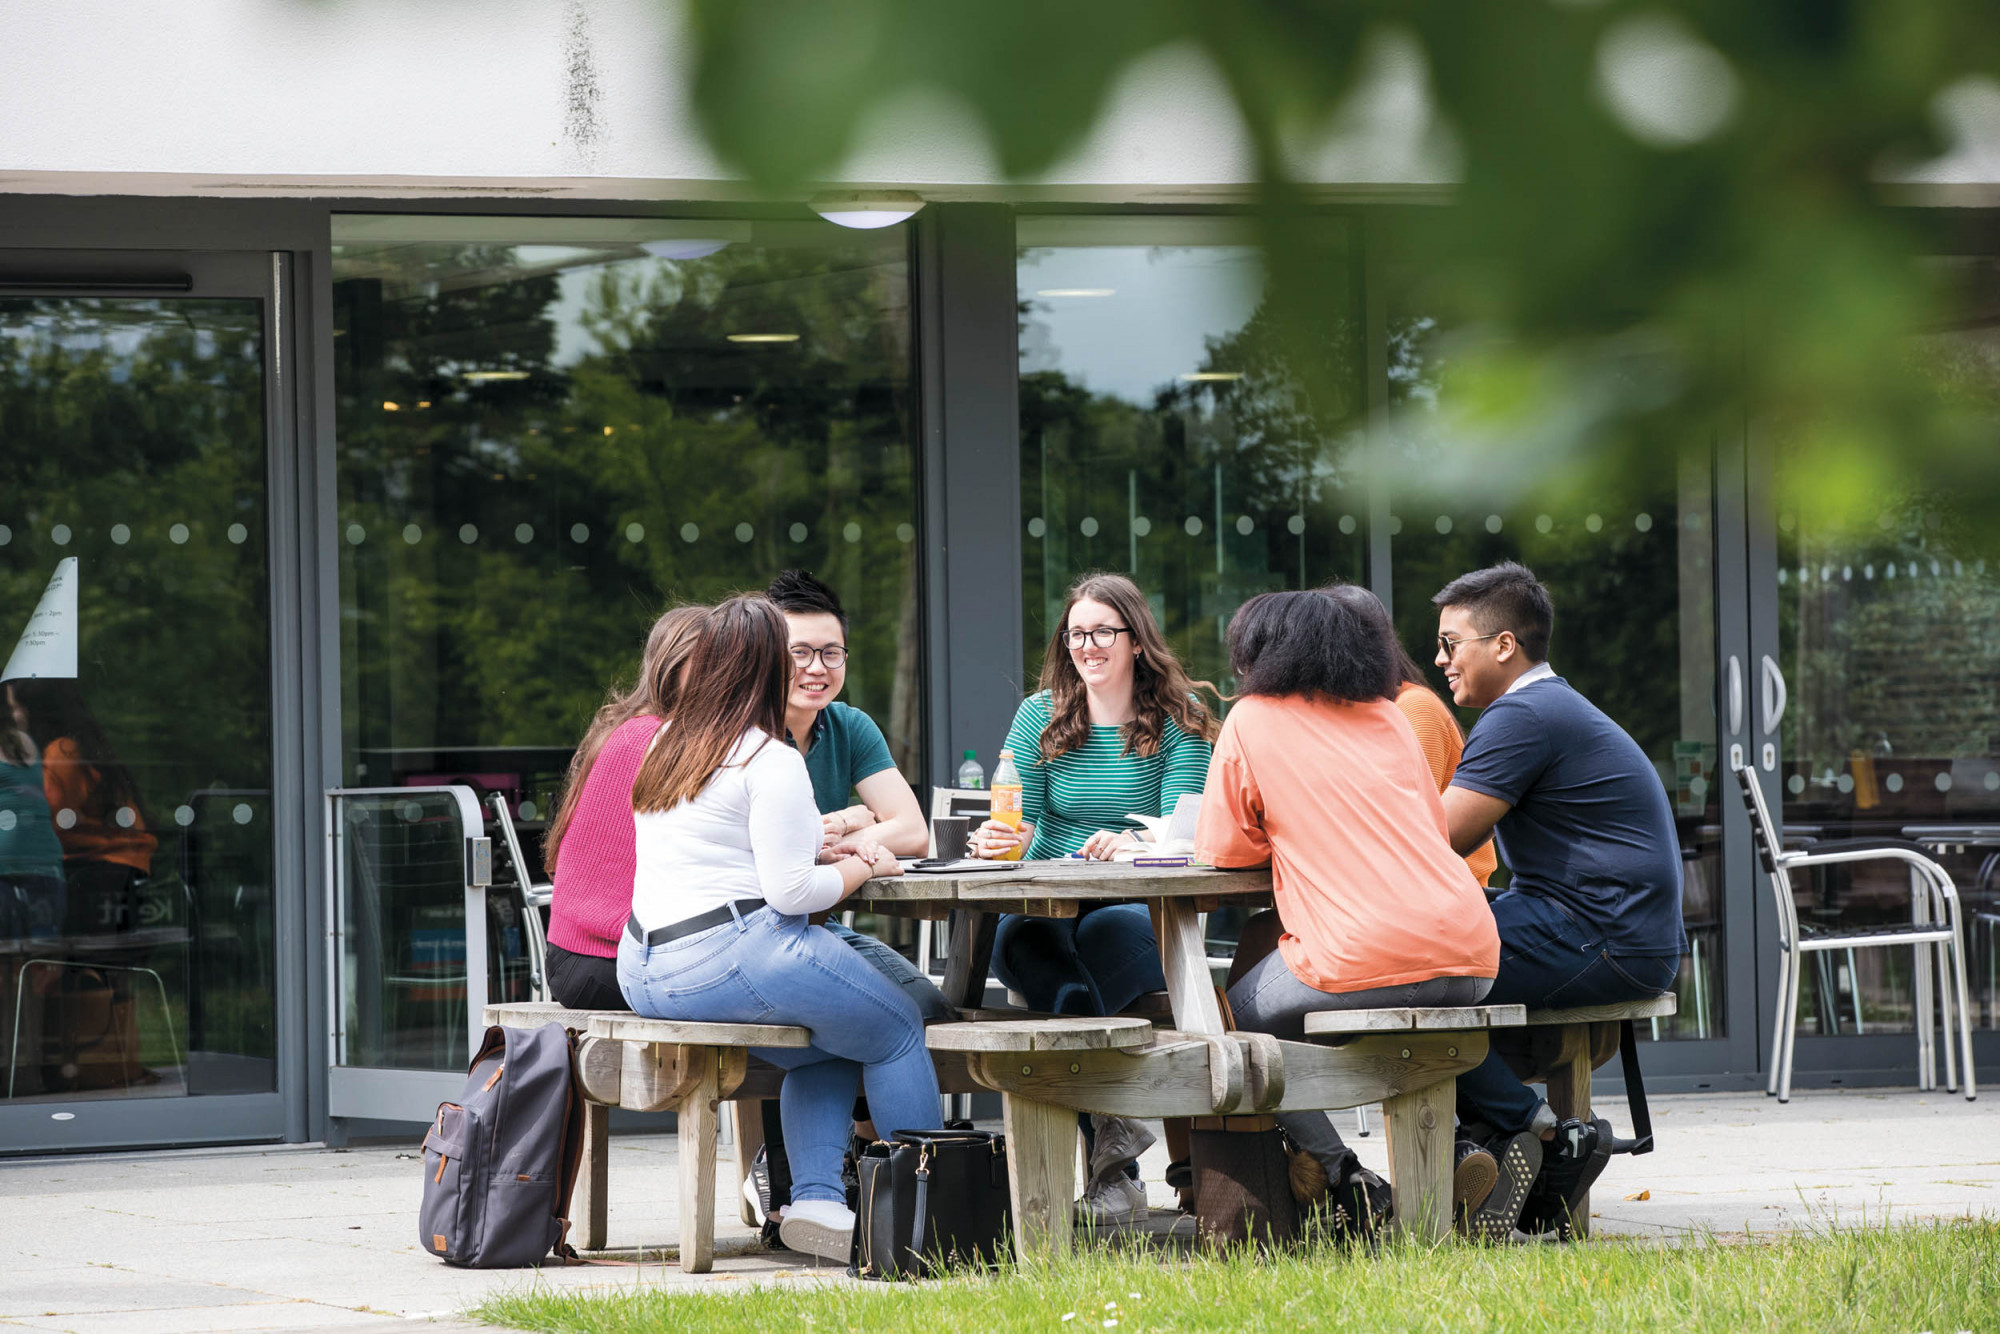 University of Kent students at a cafe on Canterbury campus